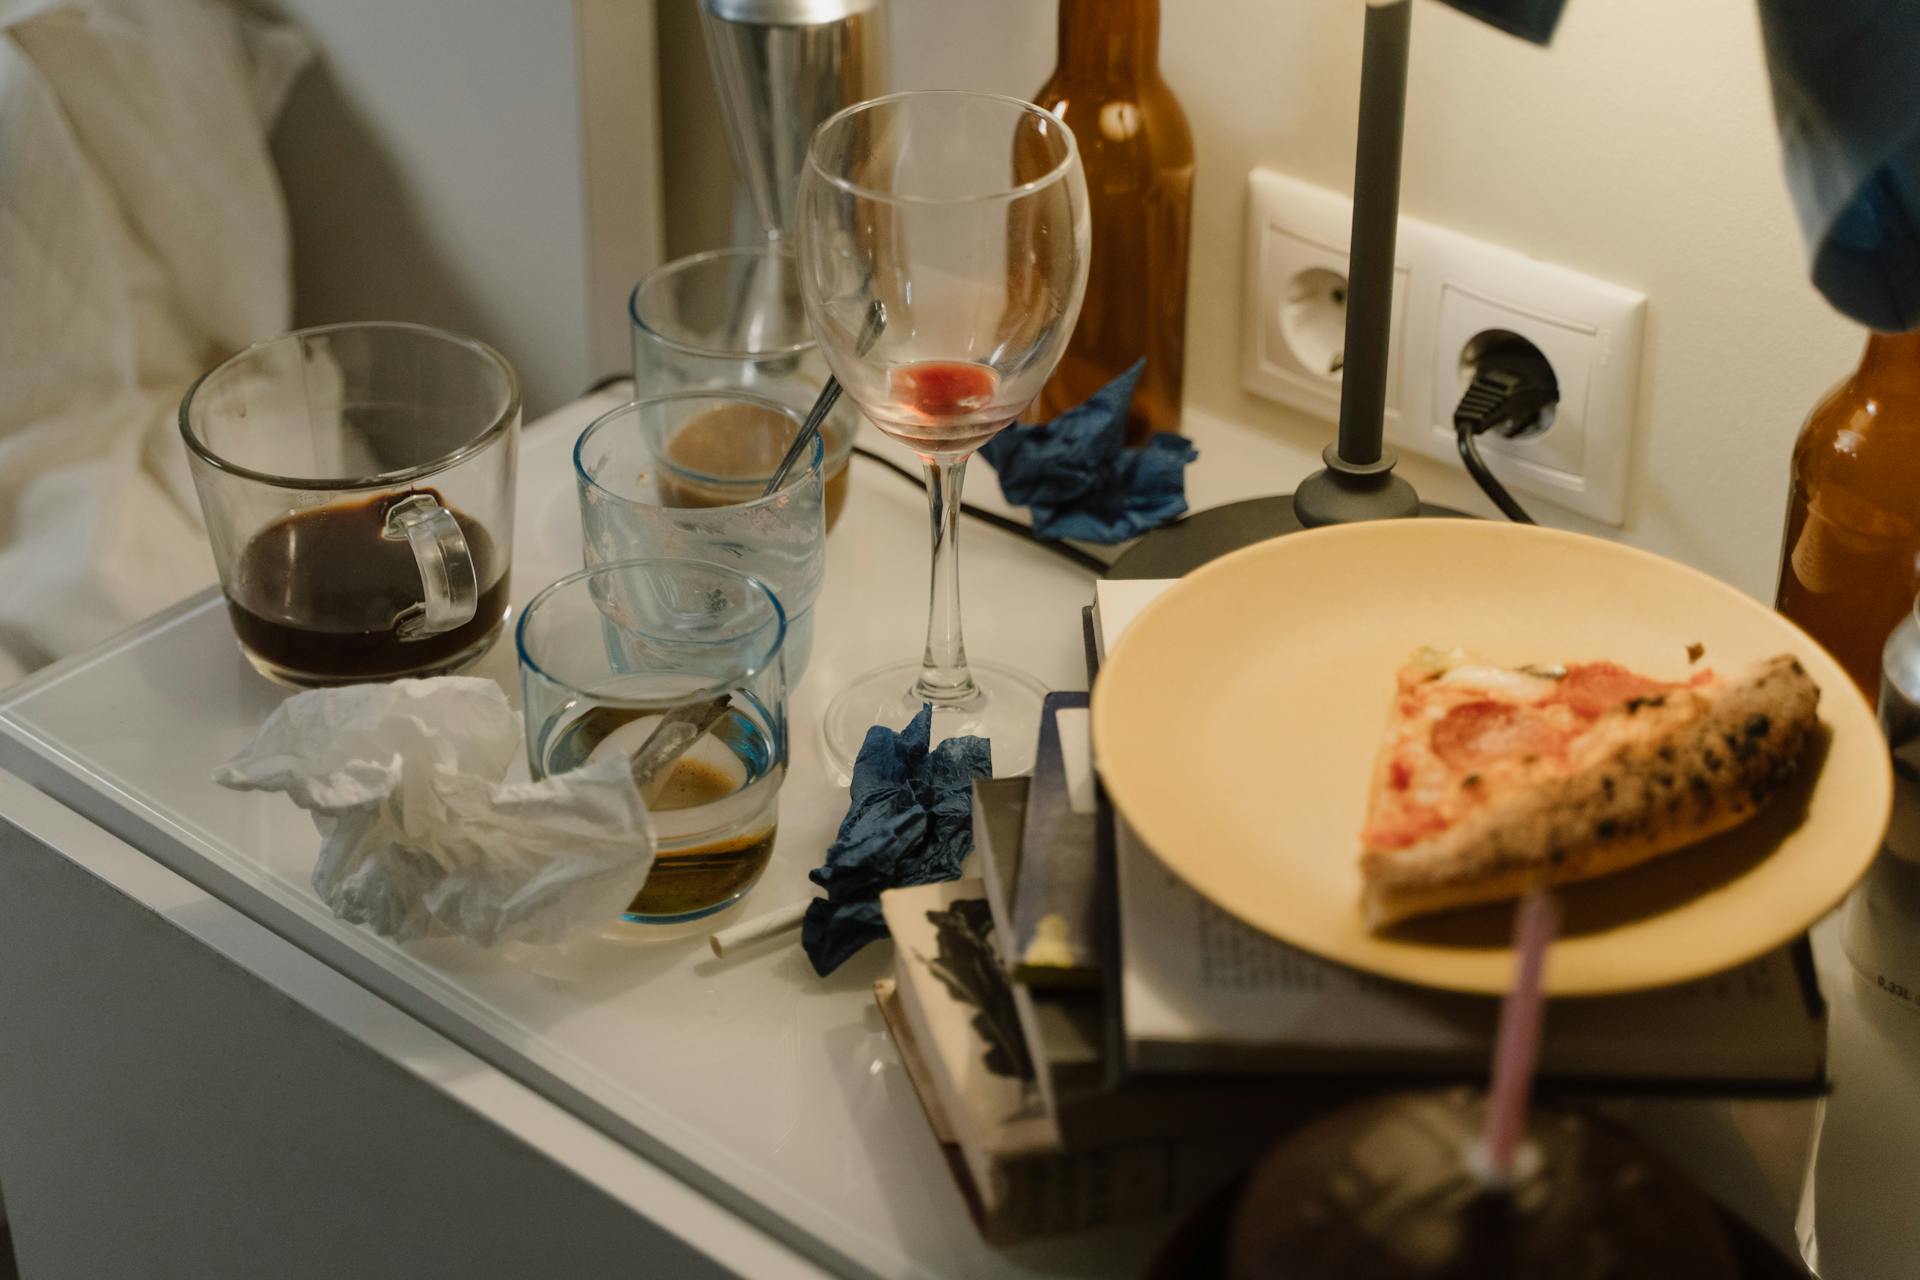 Dirty glasses and plates by the sink | Source: Pexels